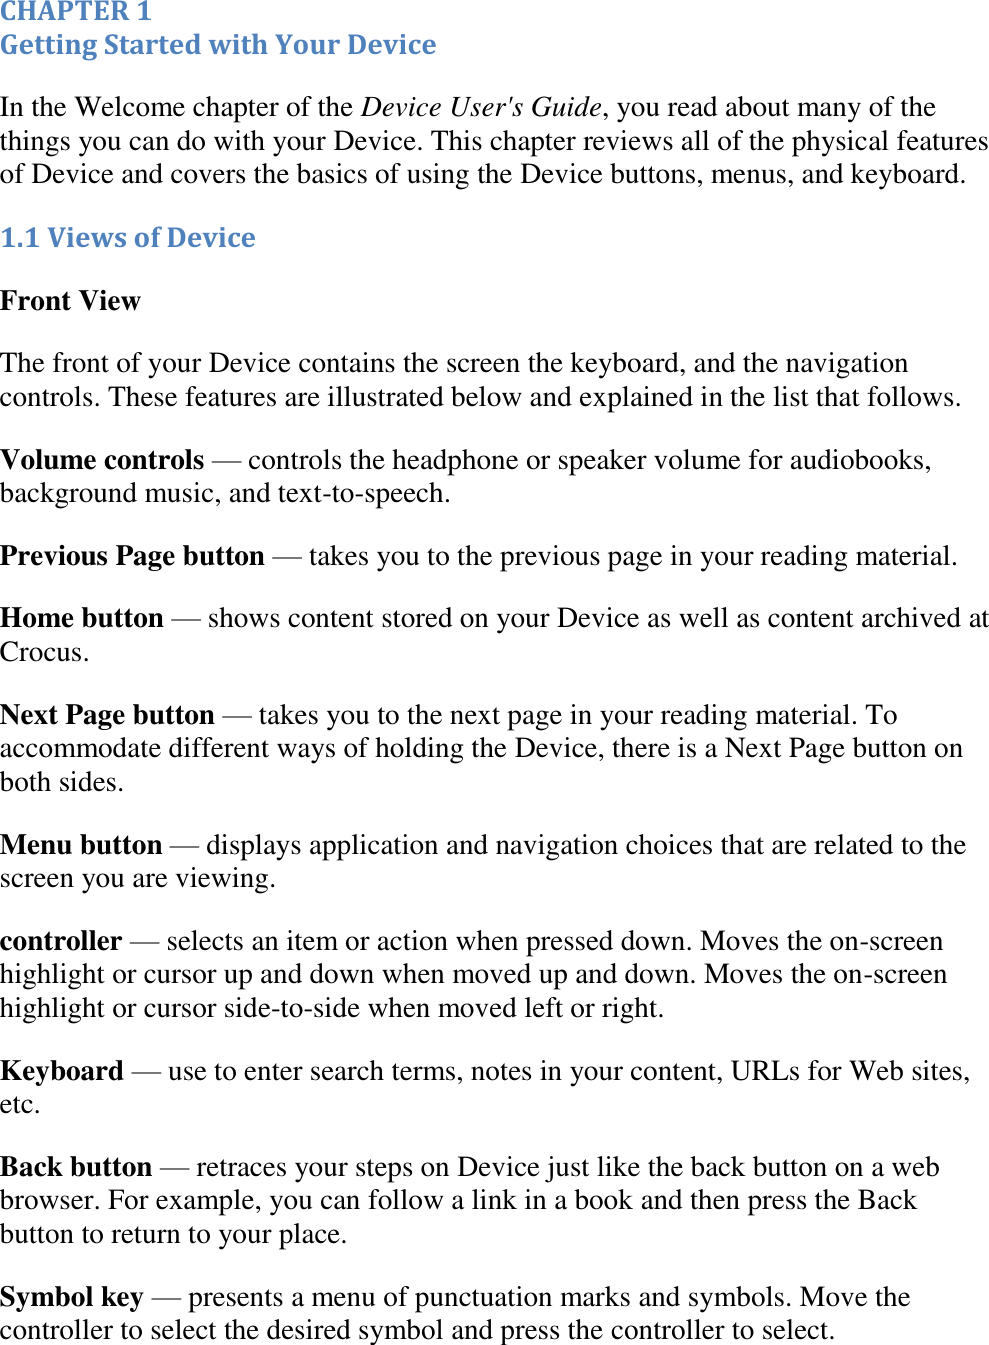   CHAPTER 1 Getting Started with Your Device In the Welcome chapter of the Device User&apos;s Guide, you read about many of the things you can do with your Device. This chapter reviews all of the physical features of Device and covers the basics of using the Device buttons, menus, and keyboard. 1.1 Views of Device Front View  The front of your Device contains the screen the keyboard, and the navigation controls. These features are illustrated below and explained in the list that follows. Volume controls — controls the headphone or speaker volume for audiobooks, background music, and text-to-speech. Previous Page button — takes you to the previous page in your reading material. Home button — shows content stored on your Device as well as content archived at Crocus. Next Page button — takes you to the next page in your reading material. To accommodate different ways of holding the Device, there is a Next Page button on both sides. Menu button — displays application and navigation choices that are related to the screen you are viewing. controller — selects an item or action when pressed down. Moves the on-screen highlight or cursor up and down when moved up and down. Moves the on-screen highlight or cursor side-to-side when moved left or right. Keyboard — use to enter search terms, notes in your content, URLs for Web sites, etc.  Back button — retraces your steps on Device just like the back button on a web browser. For example, you can follow a link in a book and then press the Back button to return to your place.  Symbol key — presents a menu of punctuation marks and symbols. Move the controller to select the desired symbol and press the controller to select. 